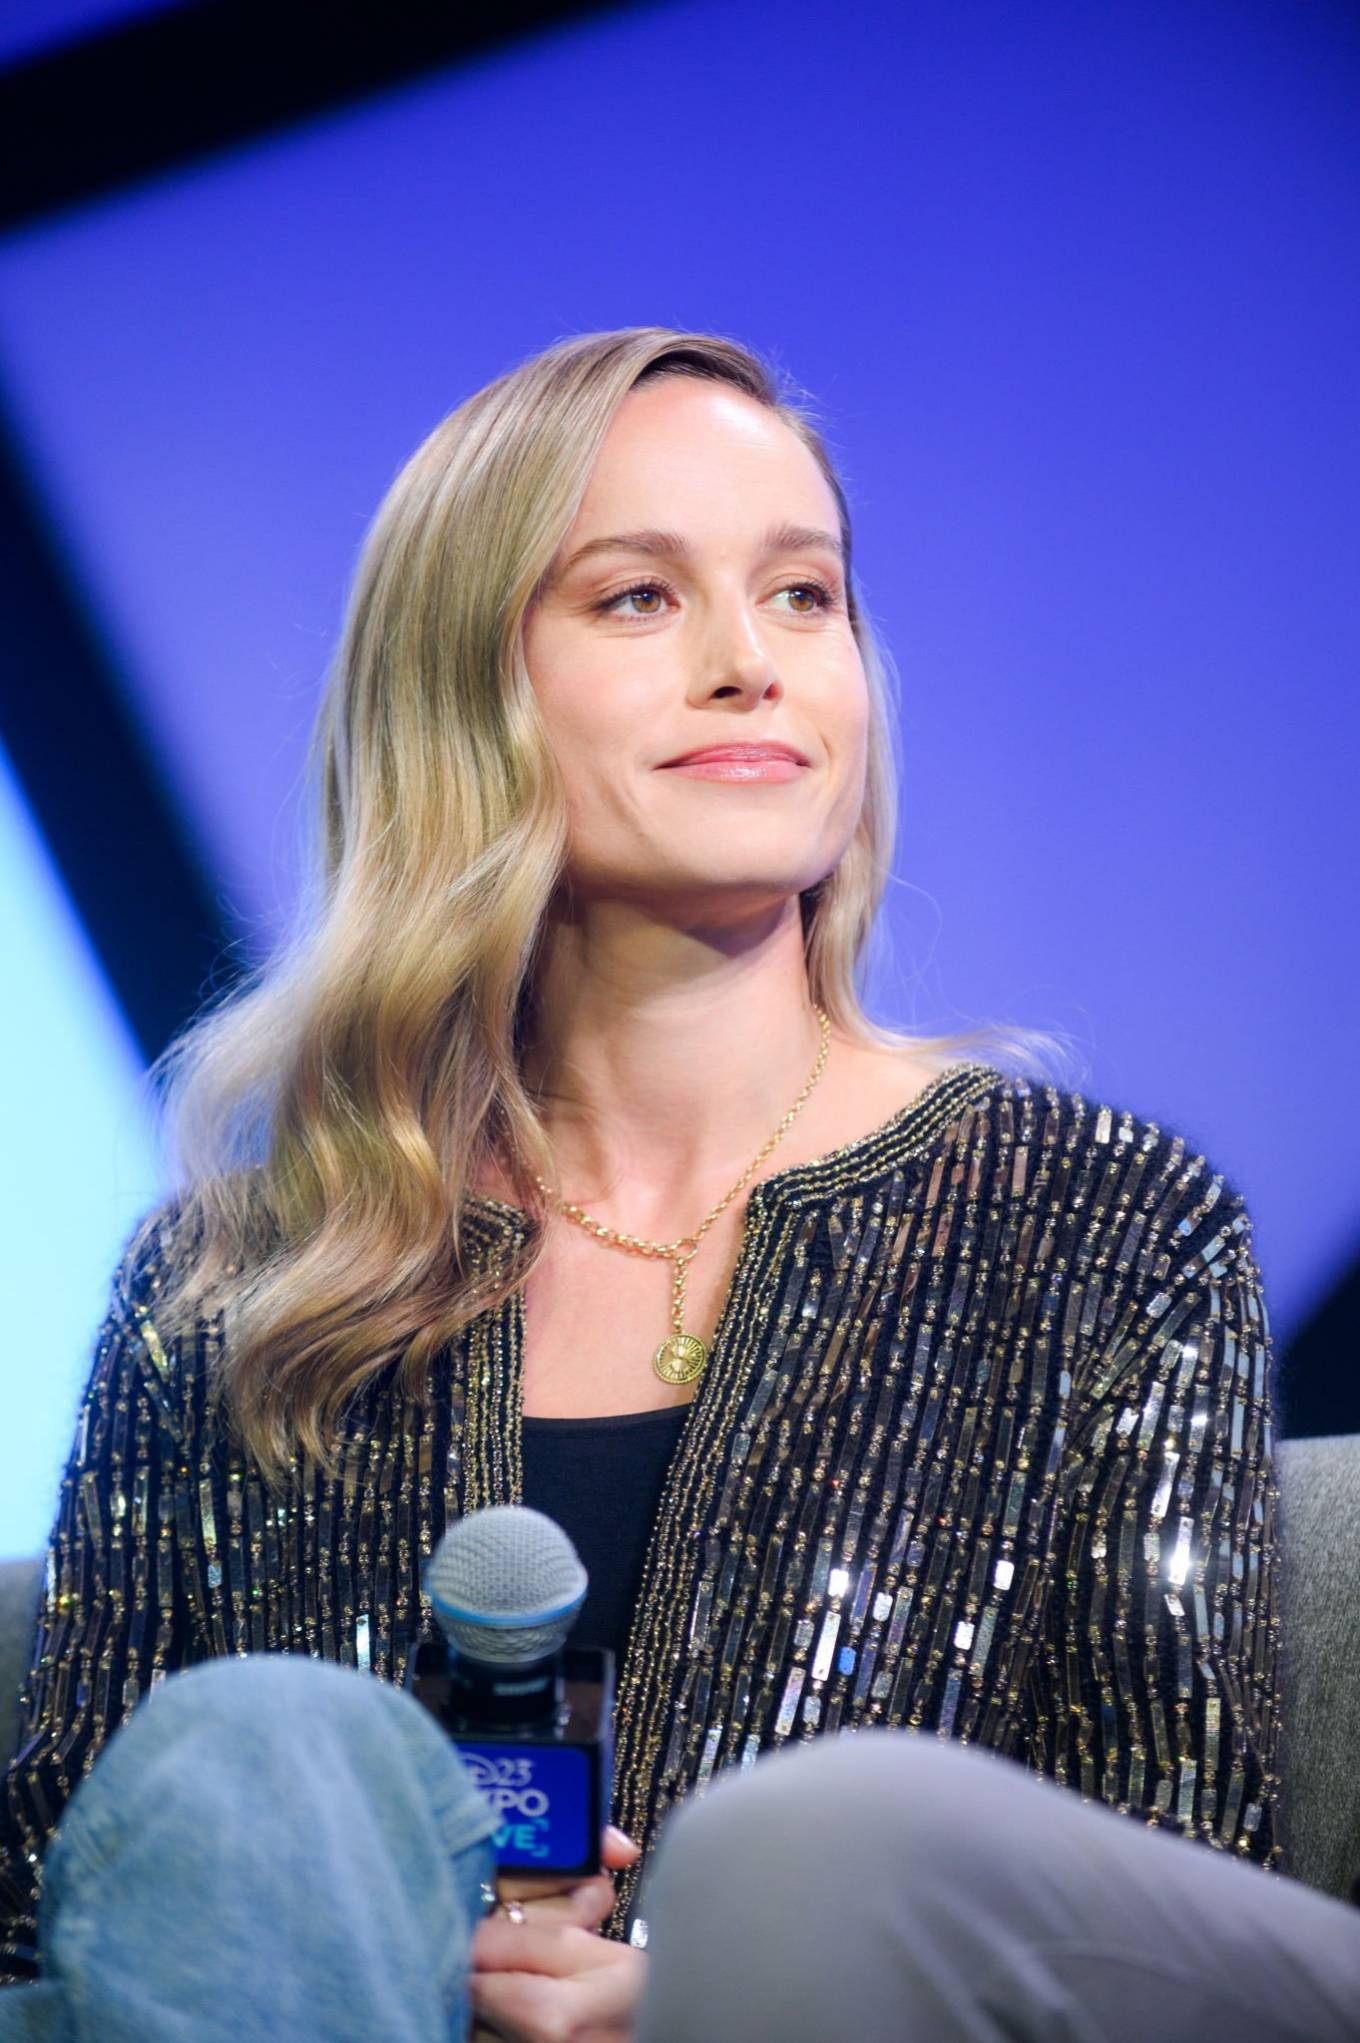 Brie Larson - 'Remembering' panel at the D23 Expo in Anaheim